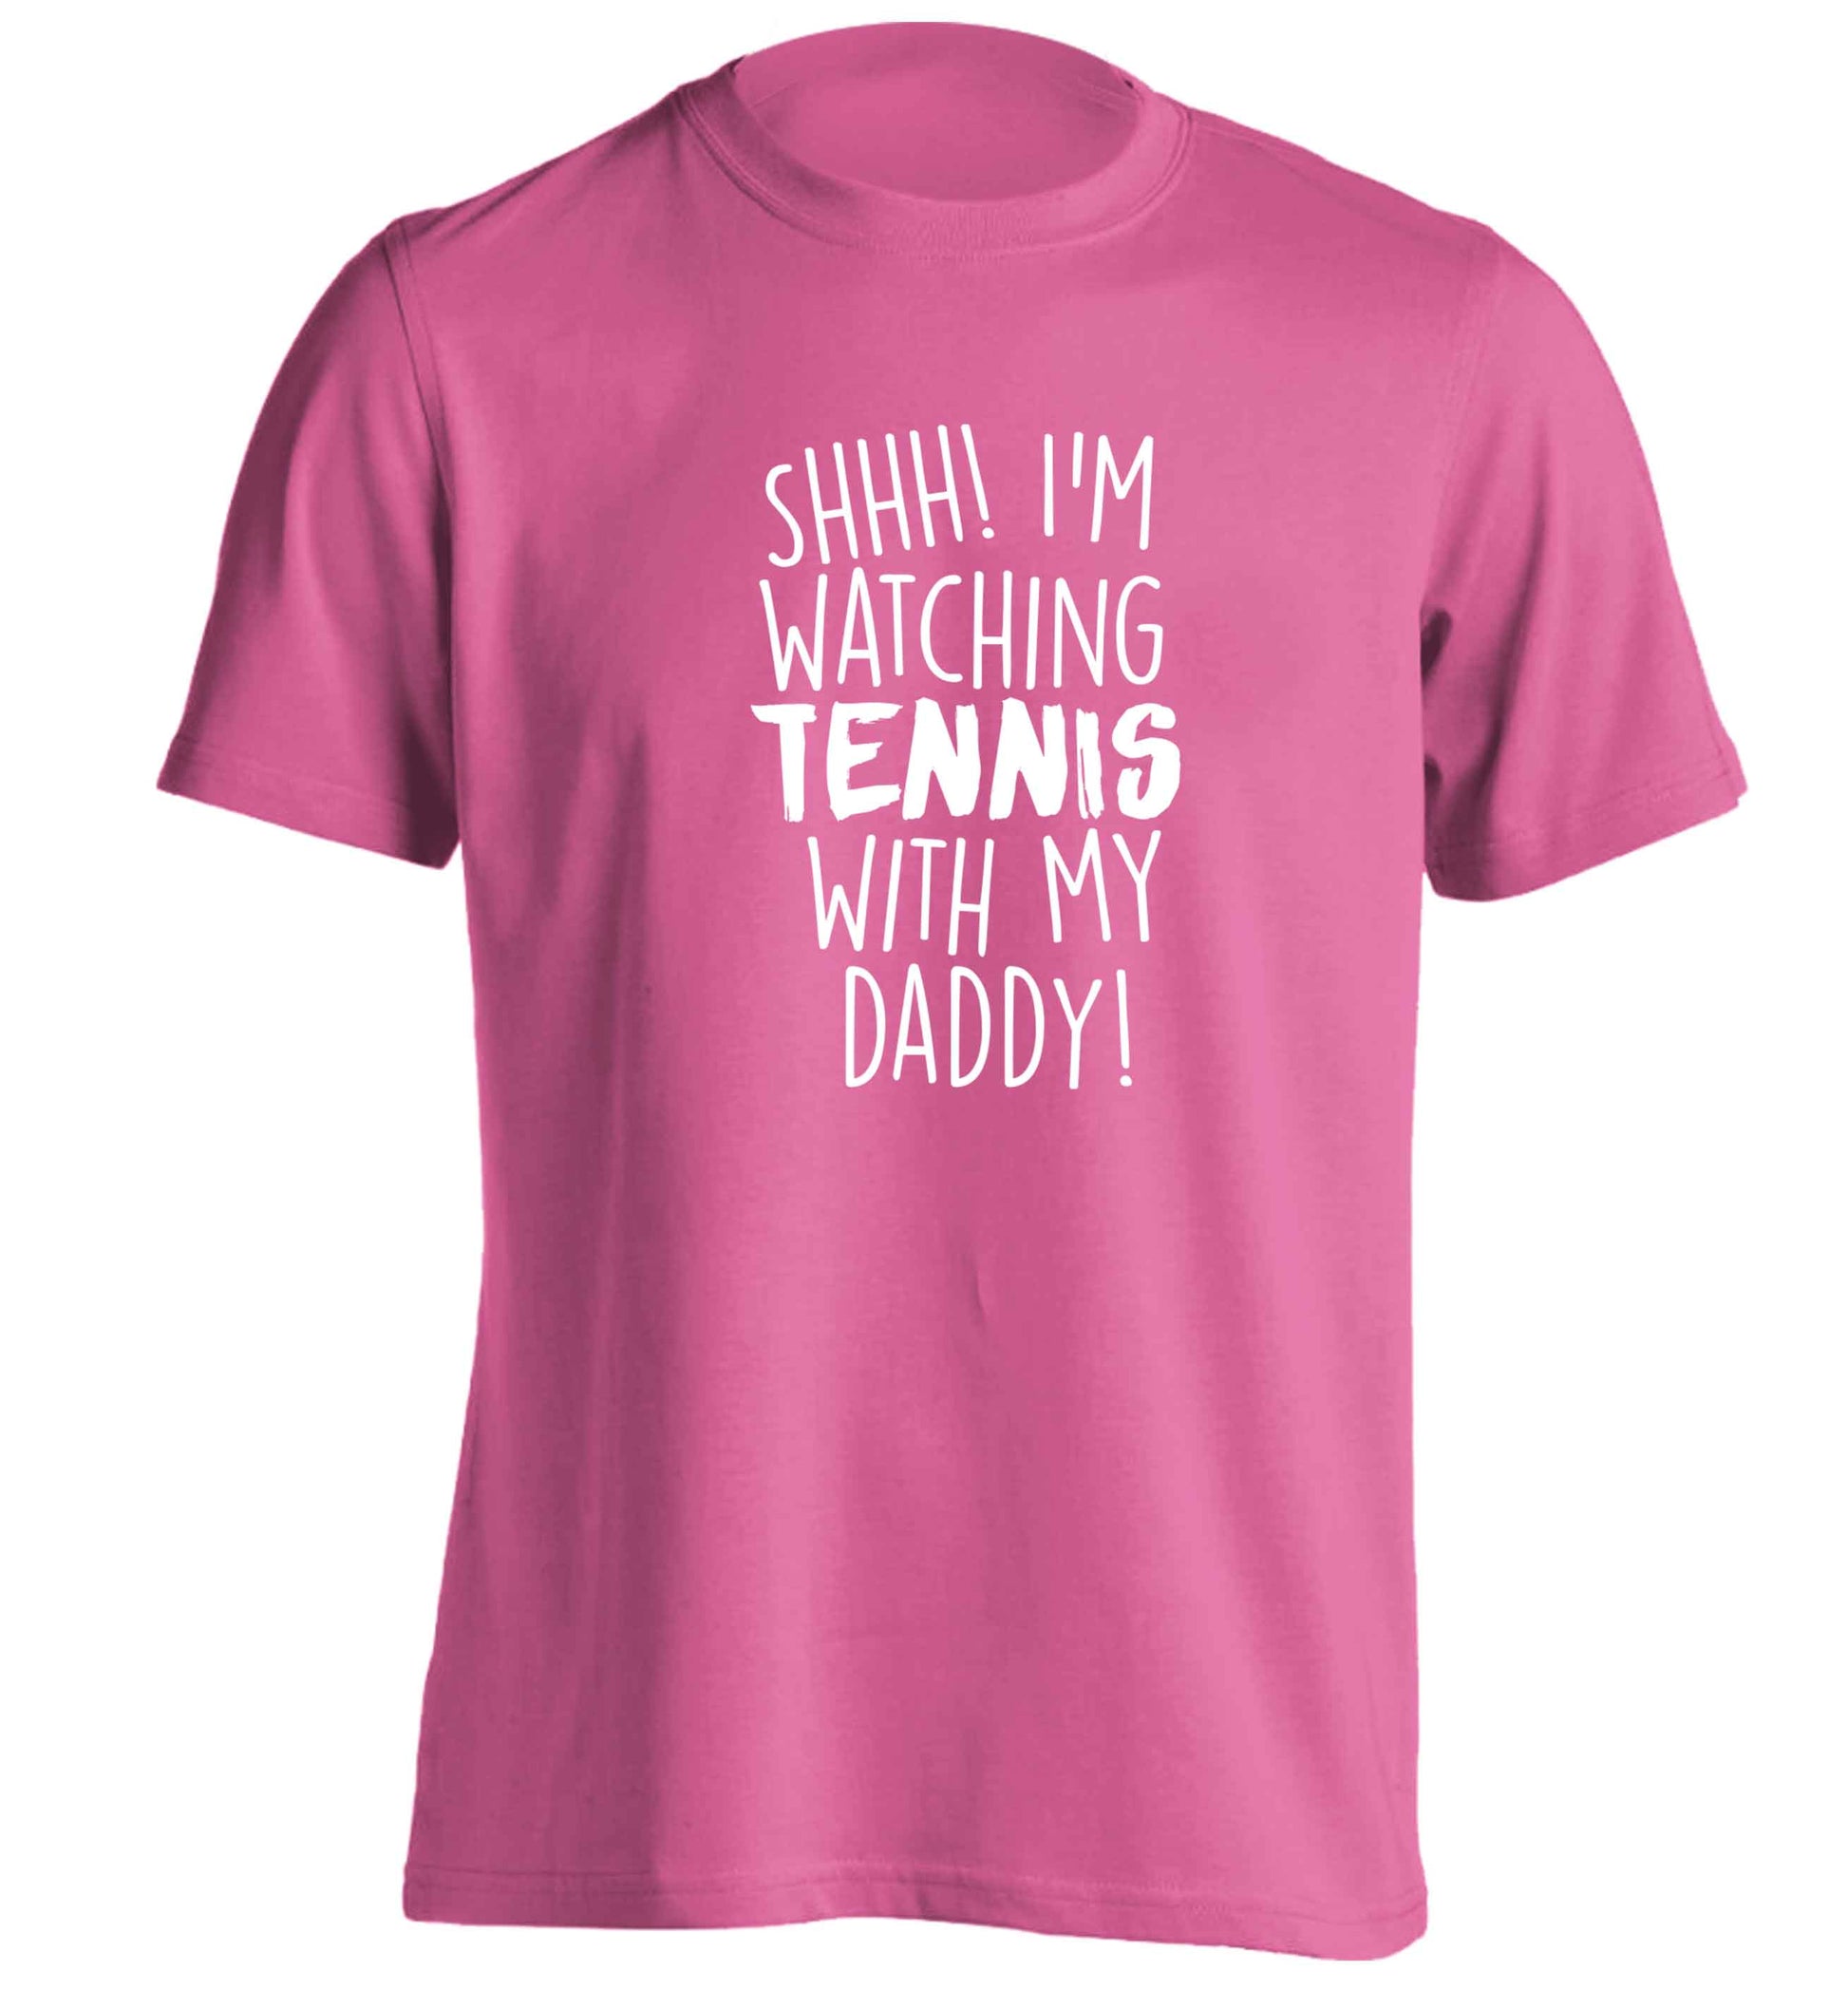 Shh! I'm watching tennis with my daddy! adults unisex pink Tshirt 2XL